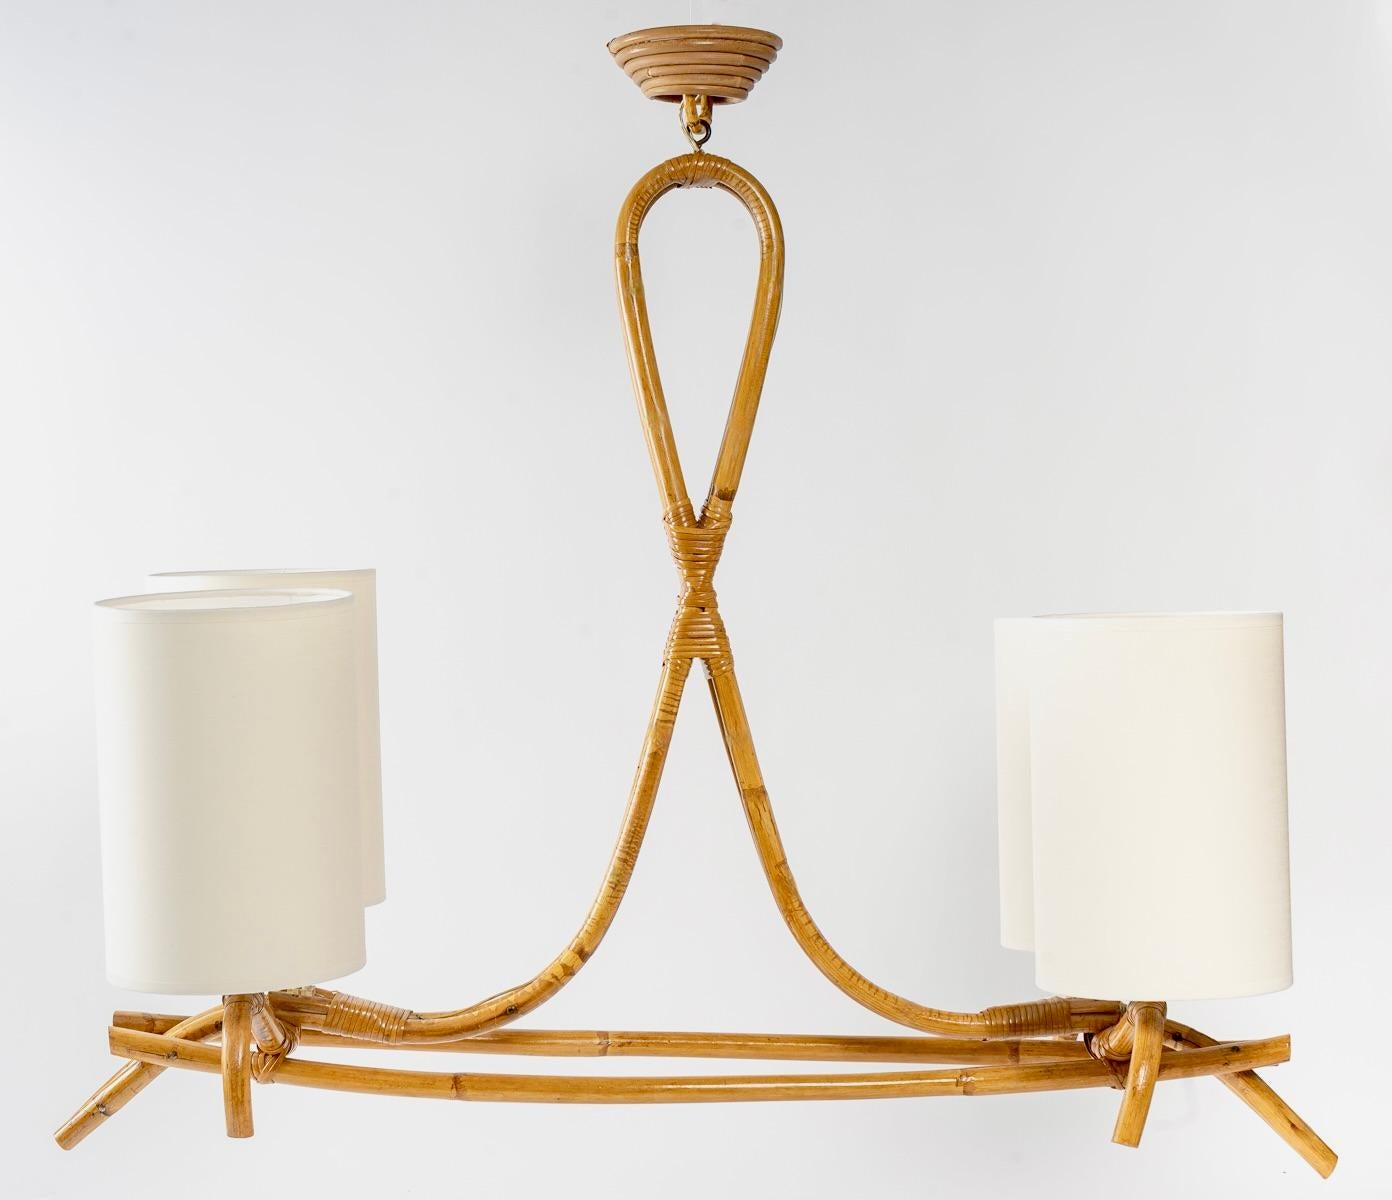 Composed of rattan rods laid horizontally on which rest at the ends four arms of light dressed with lampshades of cylindrical form in off-white cotton redone identically.
The whole is suspended by a rod in rattan posed vertically forming a loop on